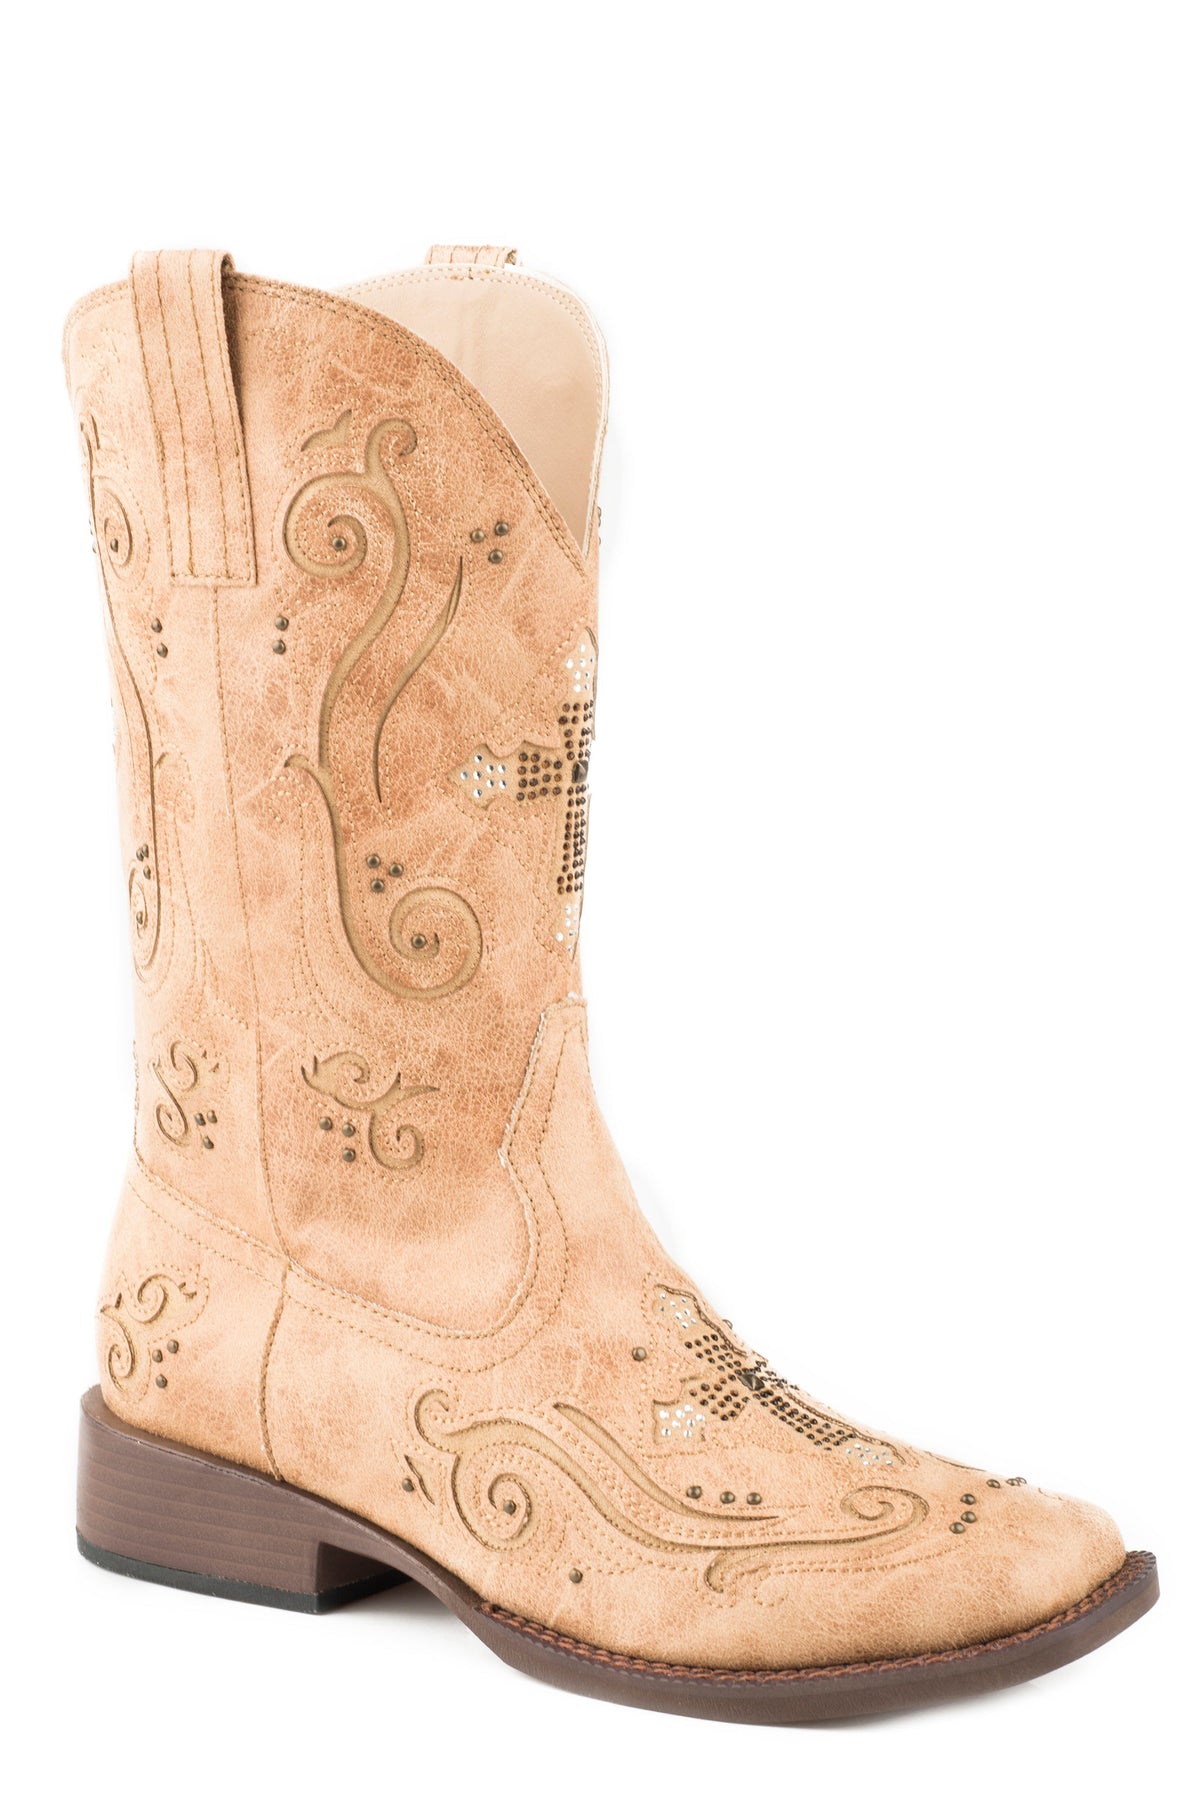 Roper Womens Cowboy Boot Vintage Tan Faux Leather With Inlay Crosses